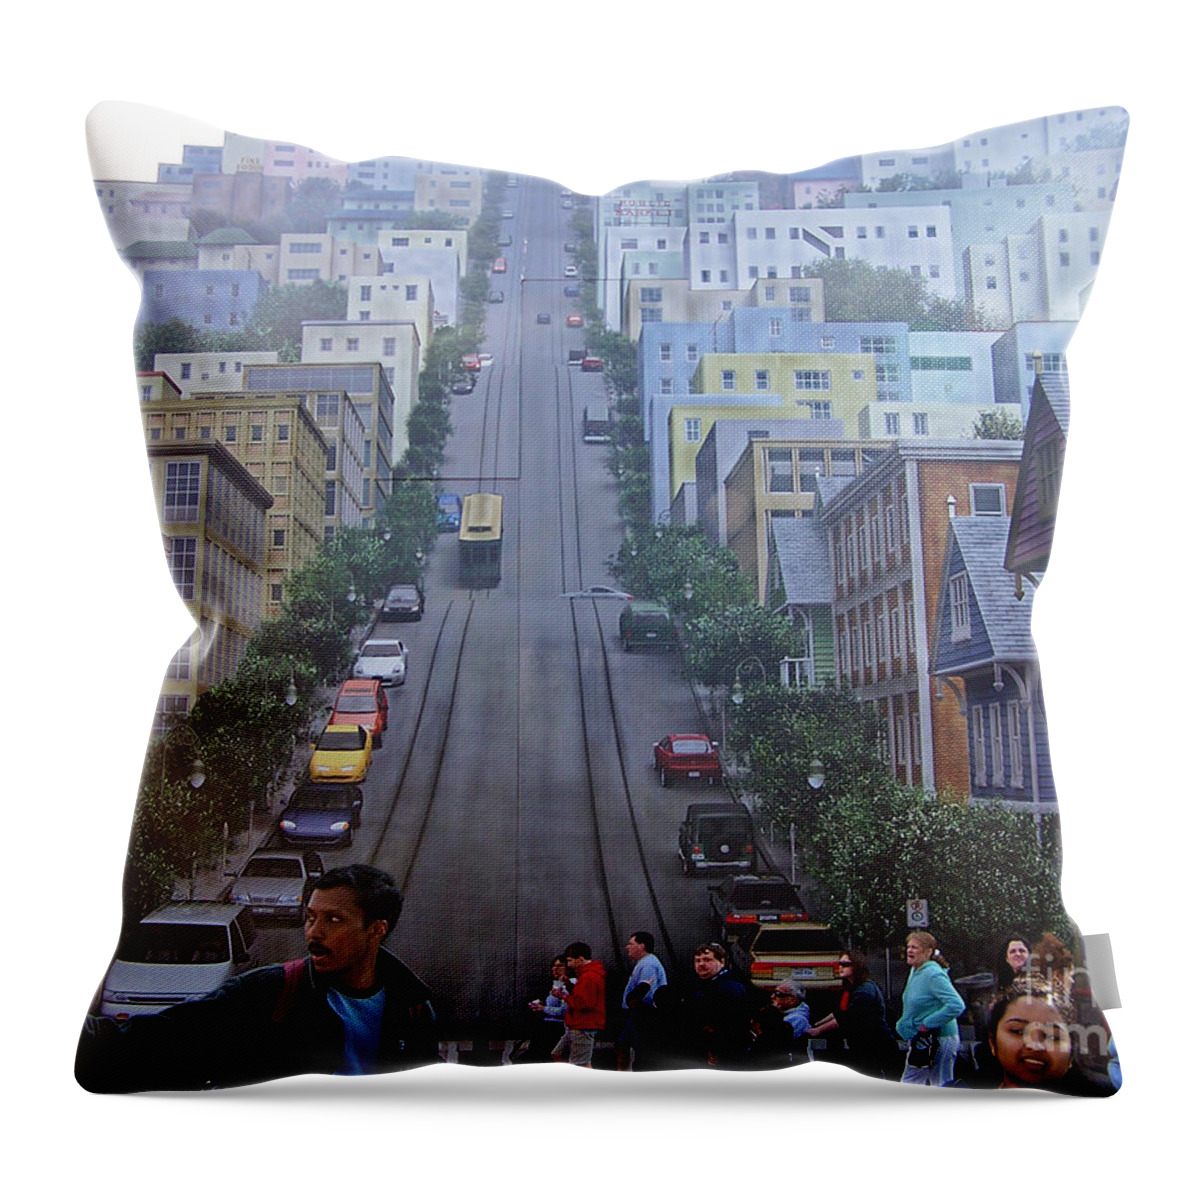 Disney Throw Pillow featuring the photograph Disney Mural by Tom Doud